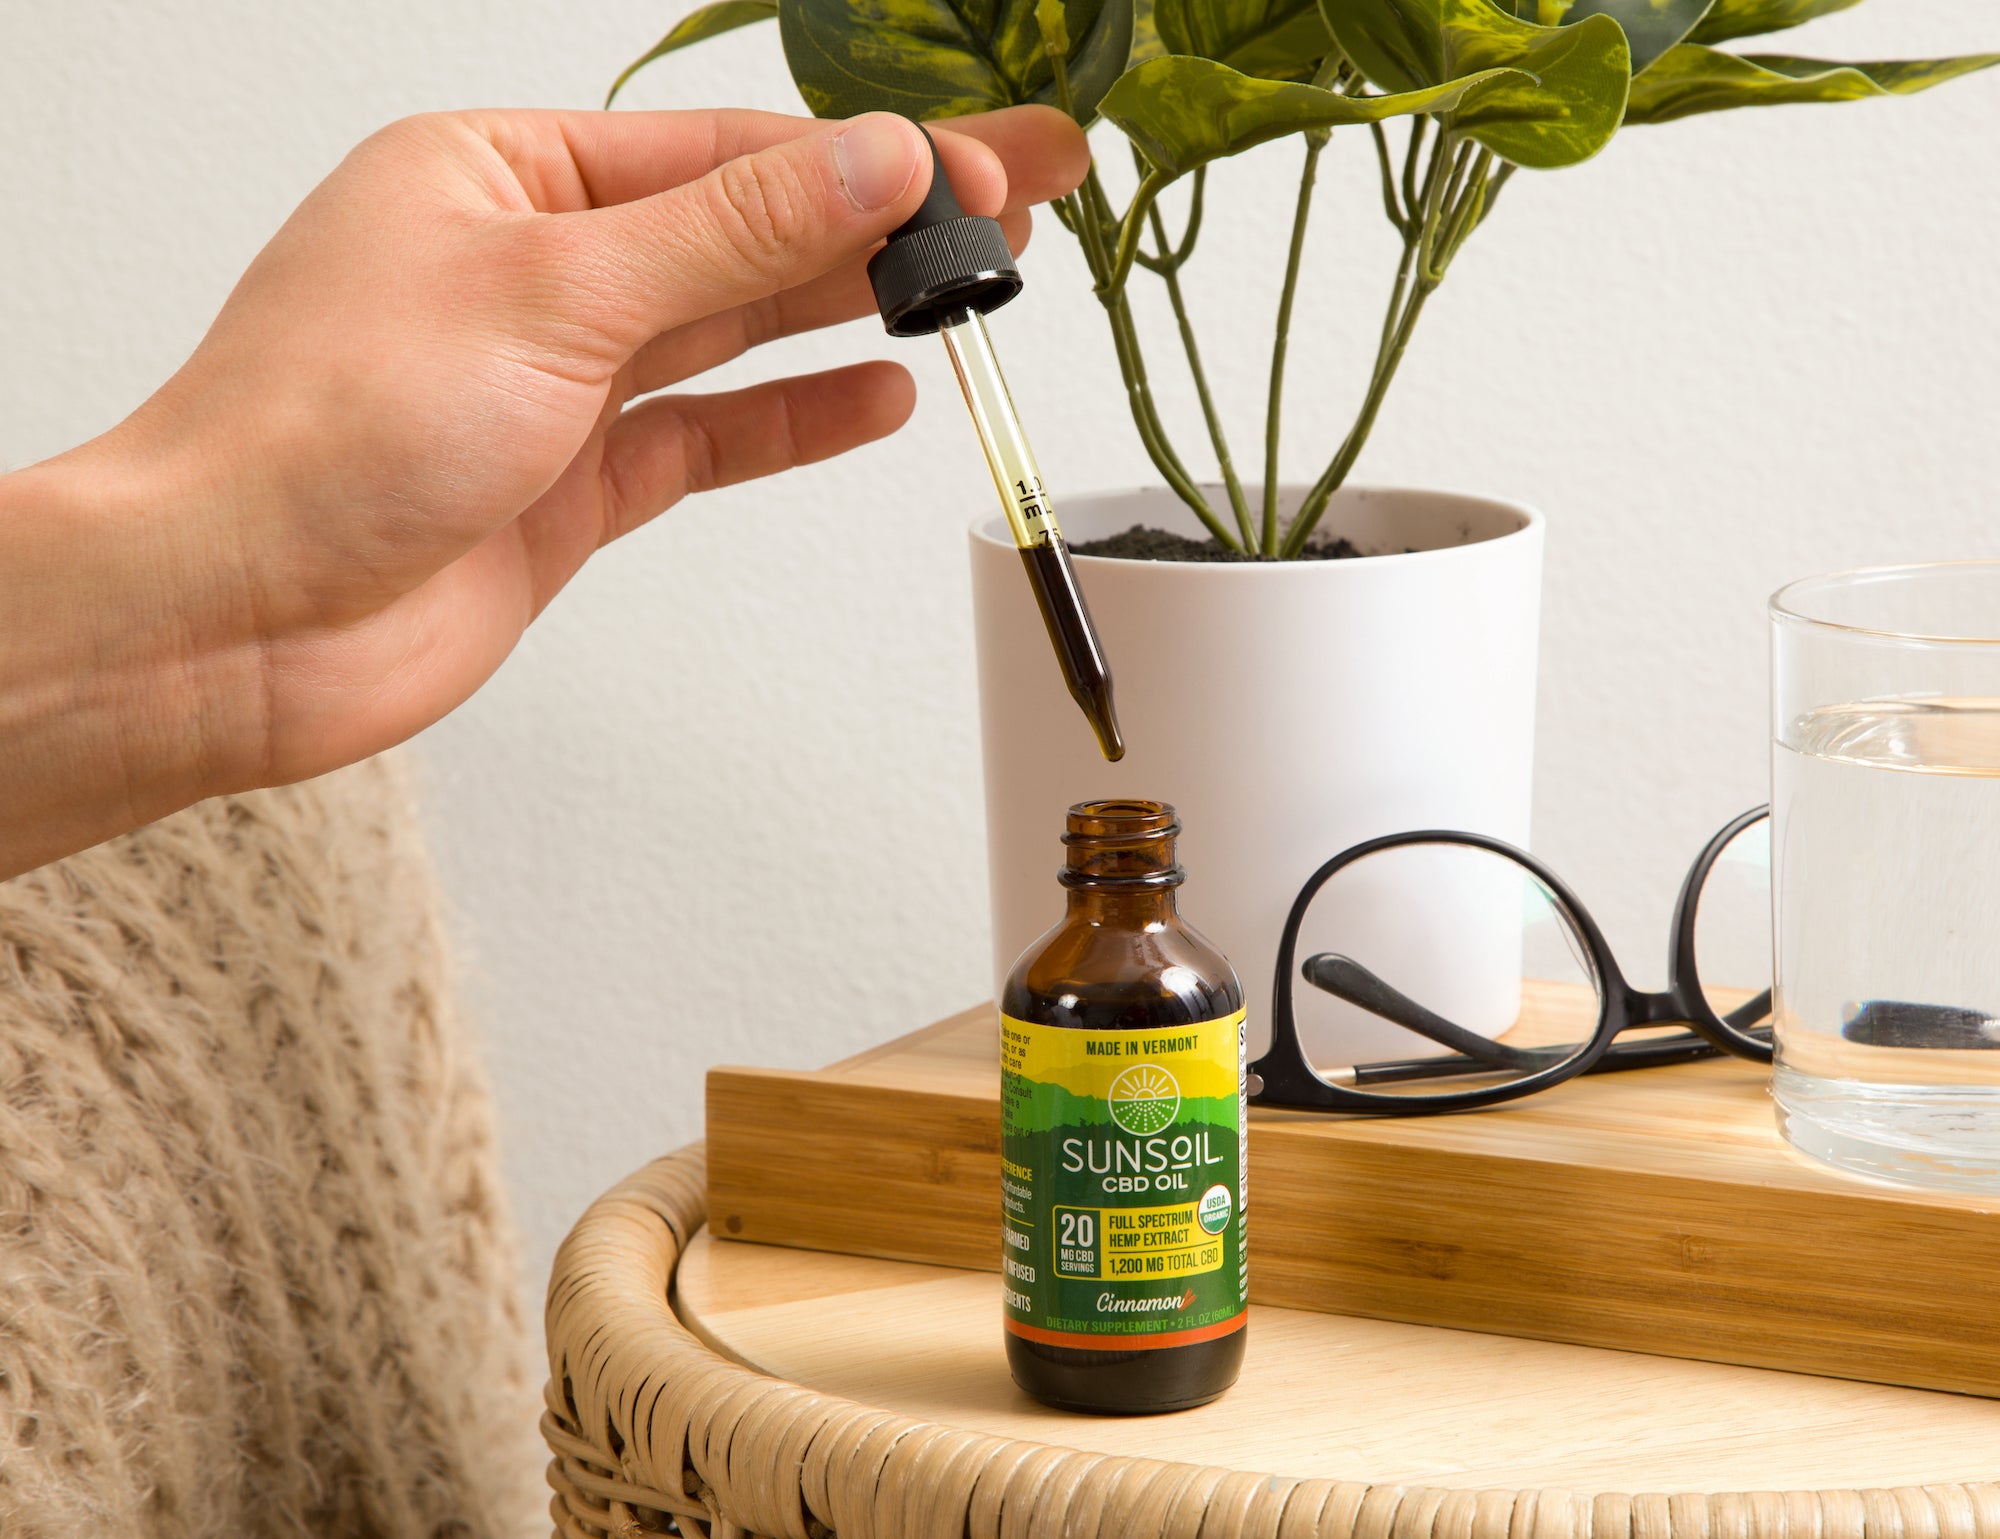 Can CBD Oil Relieve Aches and Pains?